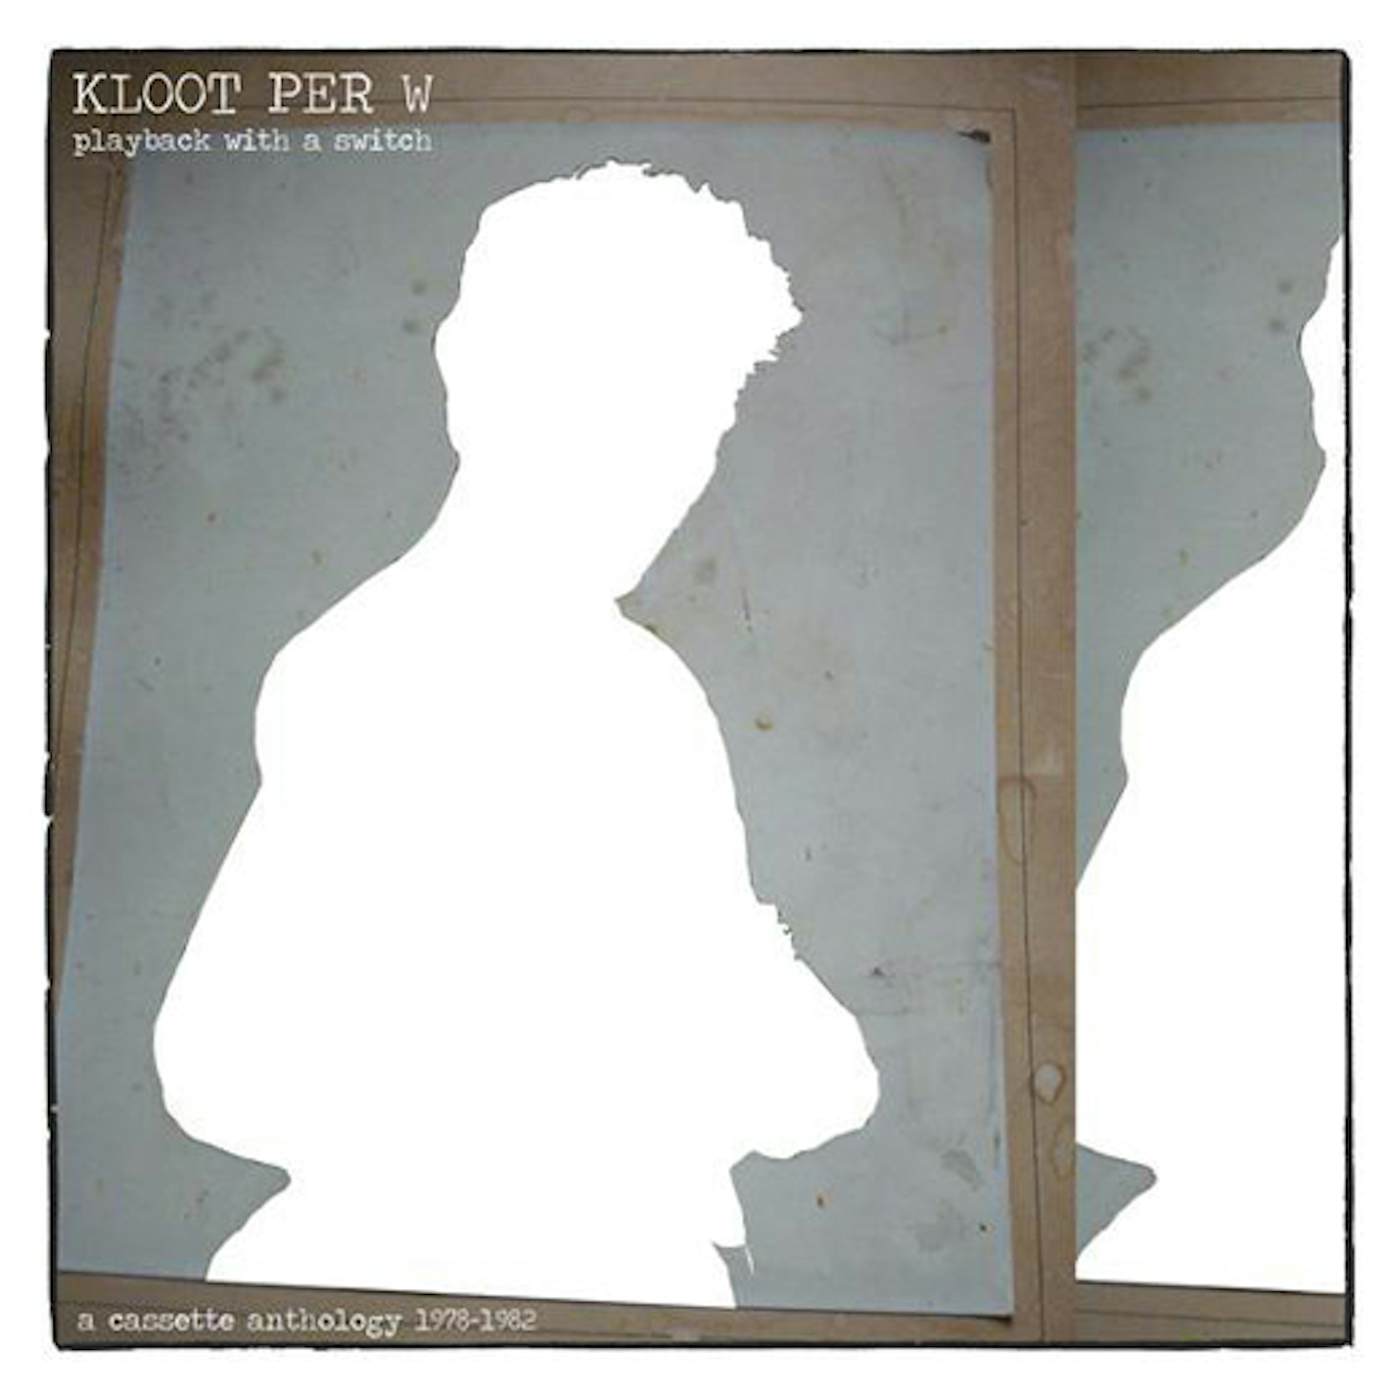 Kloot Per W PLAYBACK WITH A SWITCH Vinyl Record